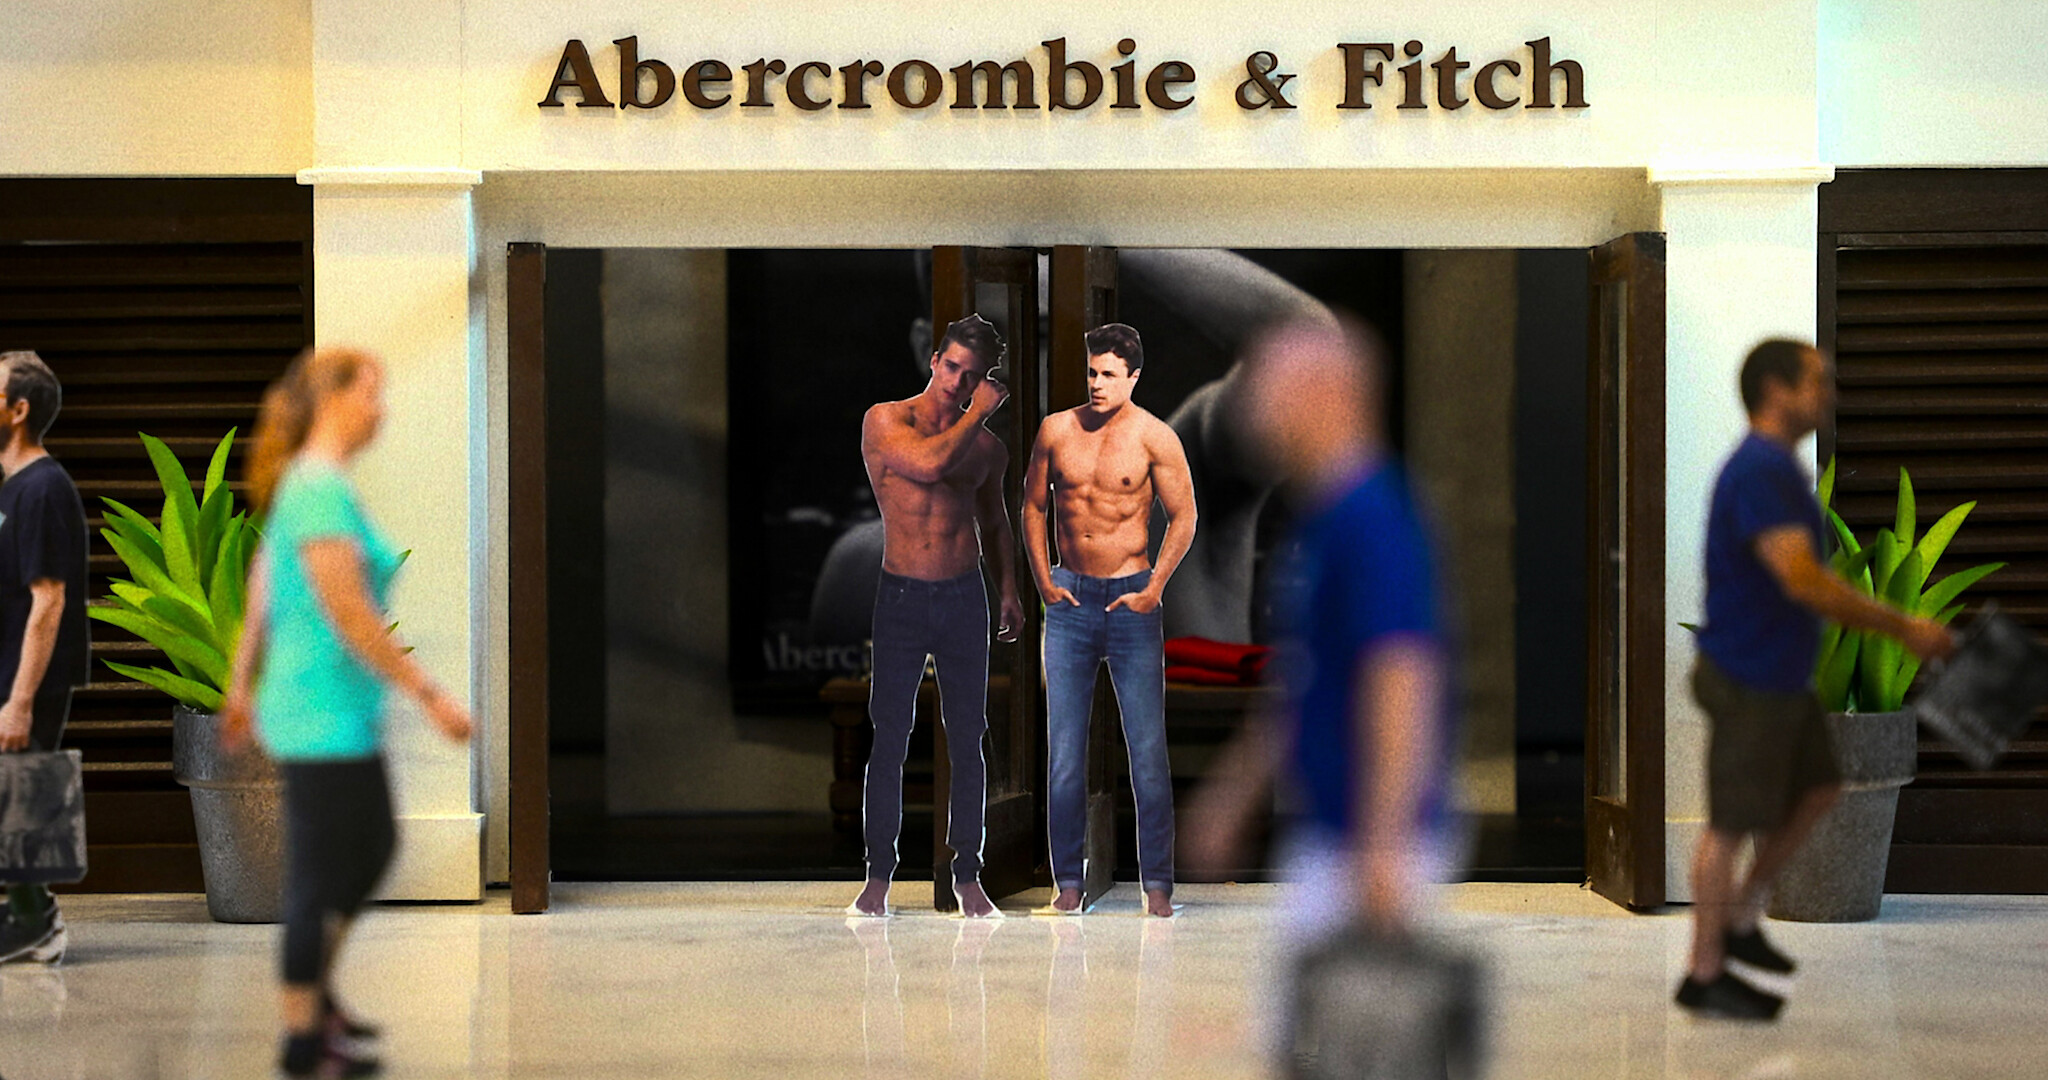 Fuck Each Other Fiercely - An Oral History of Shopping at Abercrombie & Fitch - Netflix Tudum